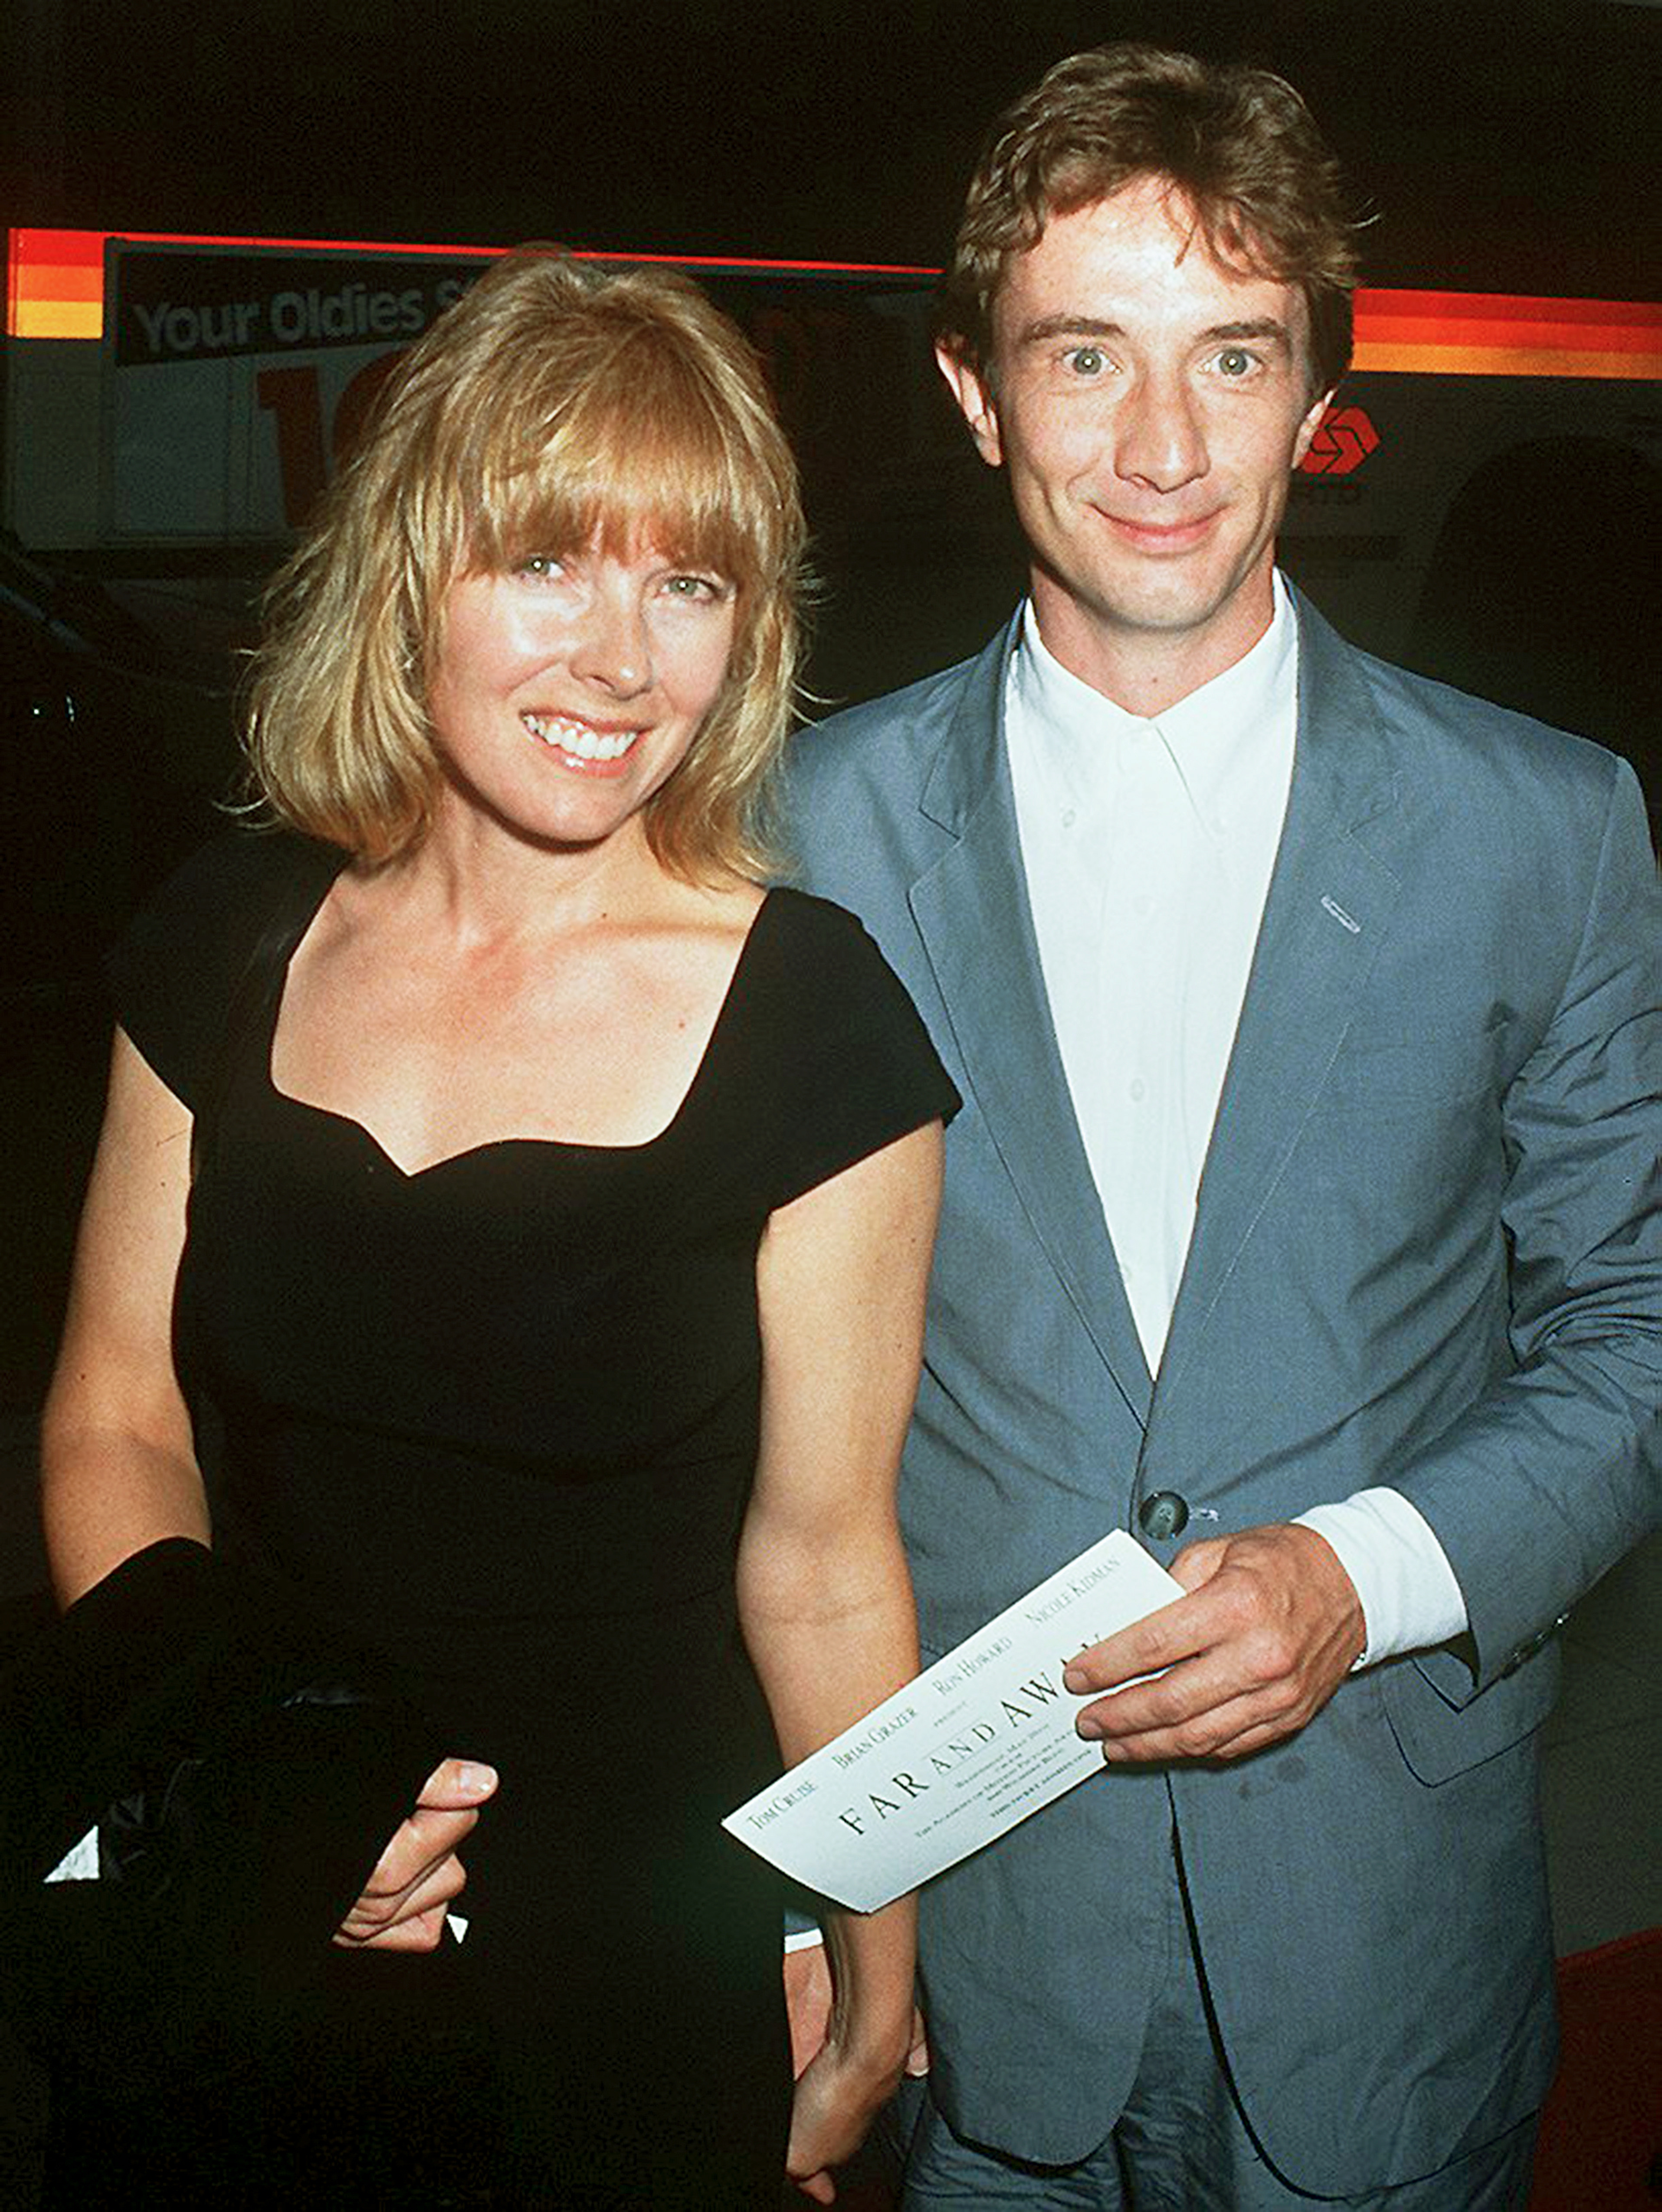 Martin Short and his wife Nancy Dolman at the premiere of the film "Far And Away" in 1992. | Source: Getty Images